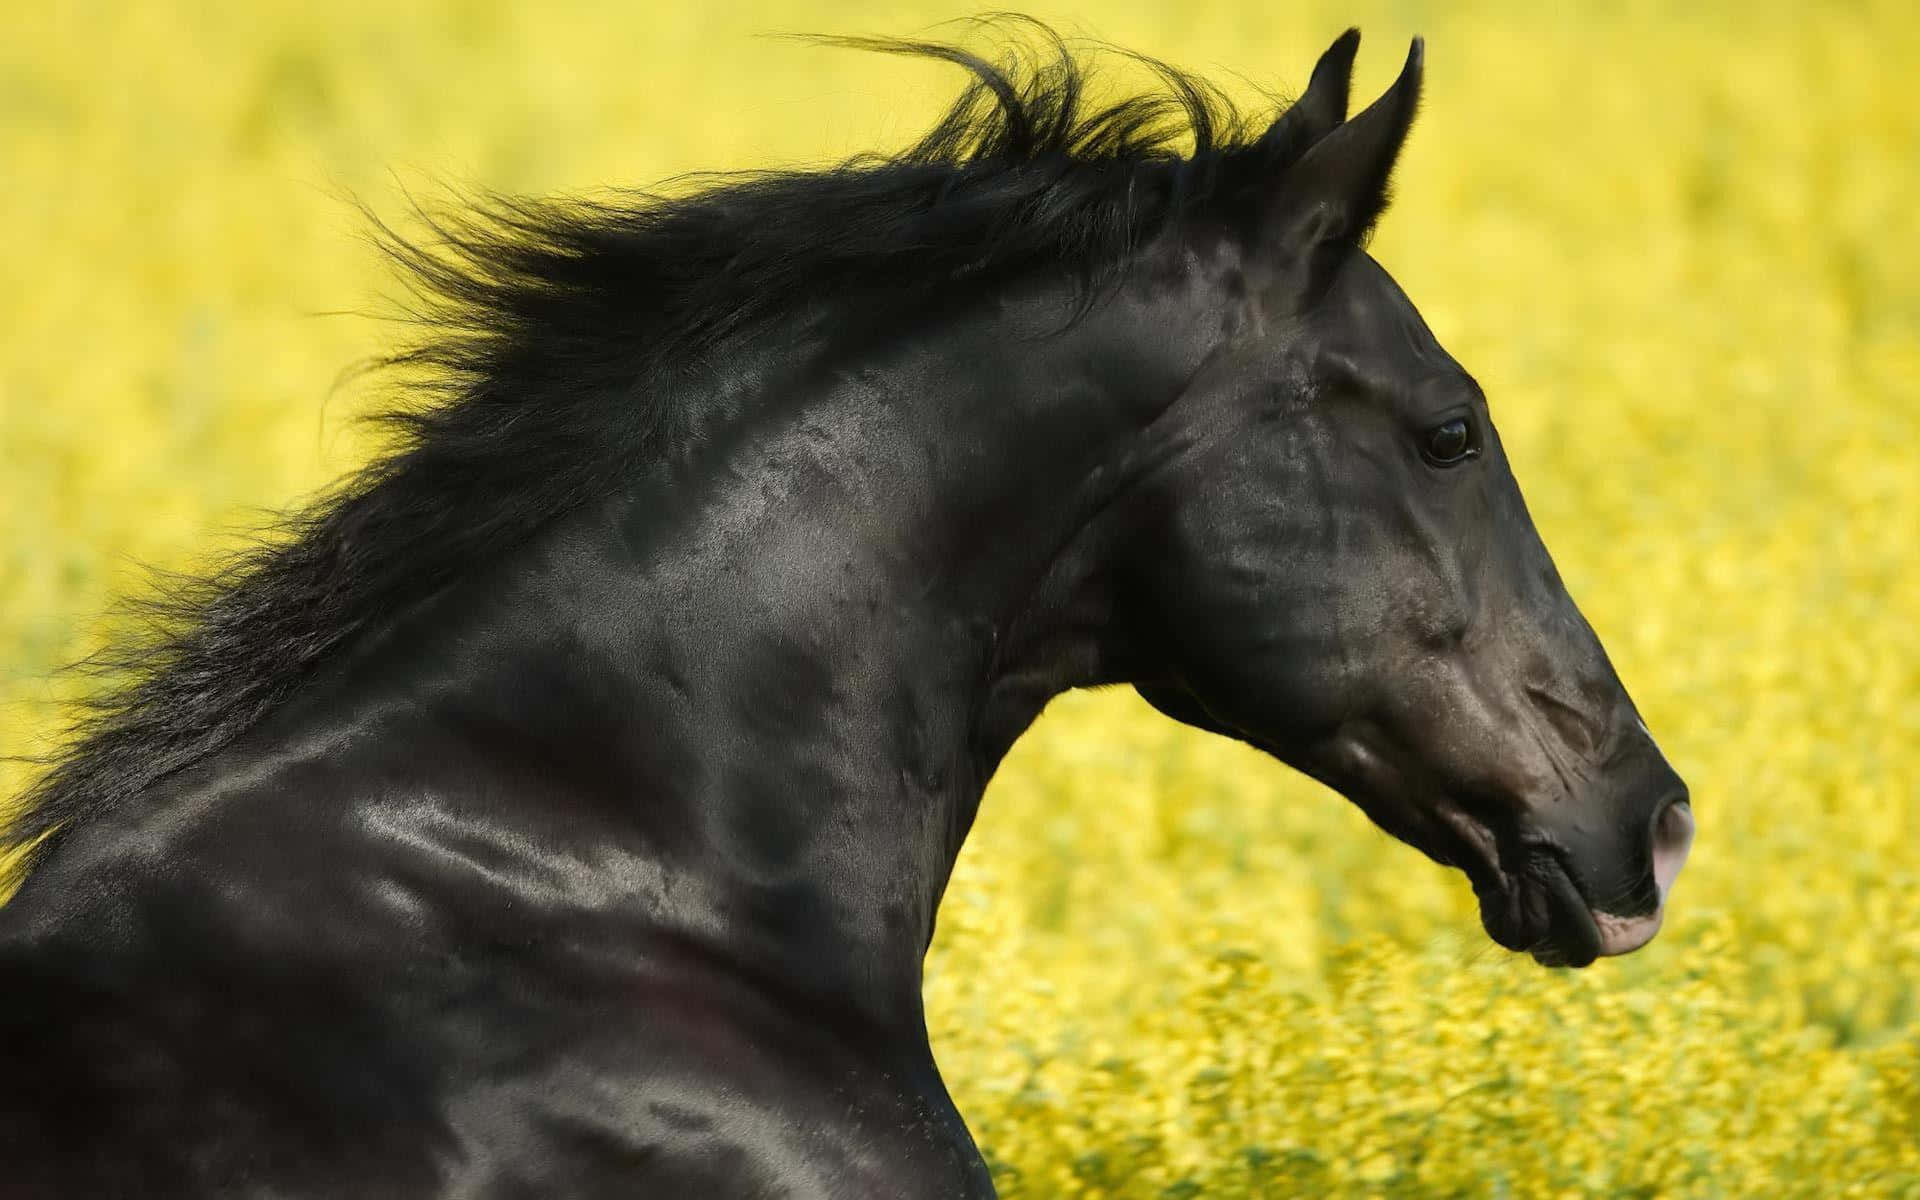 "The majestic Black Horse, running gracefully through the wilderness"